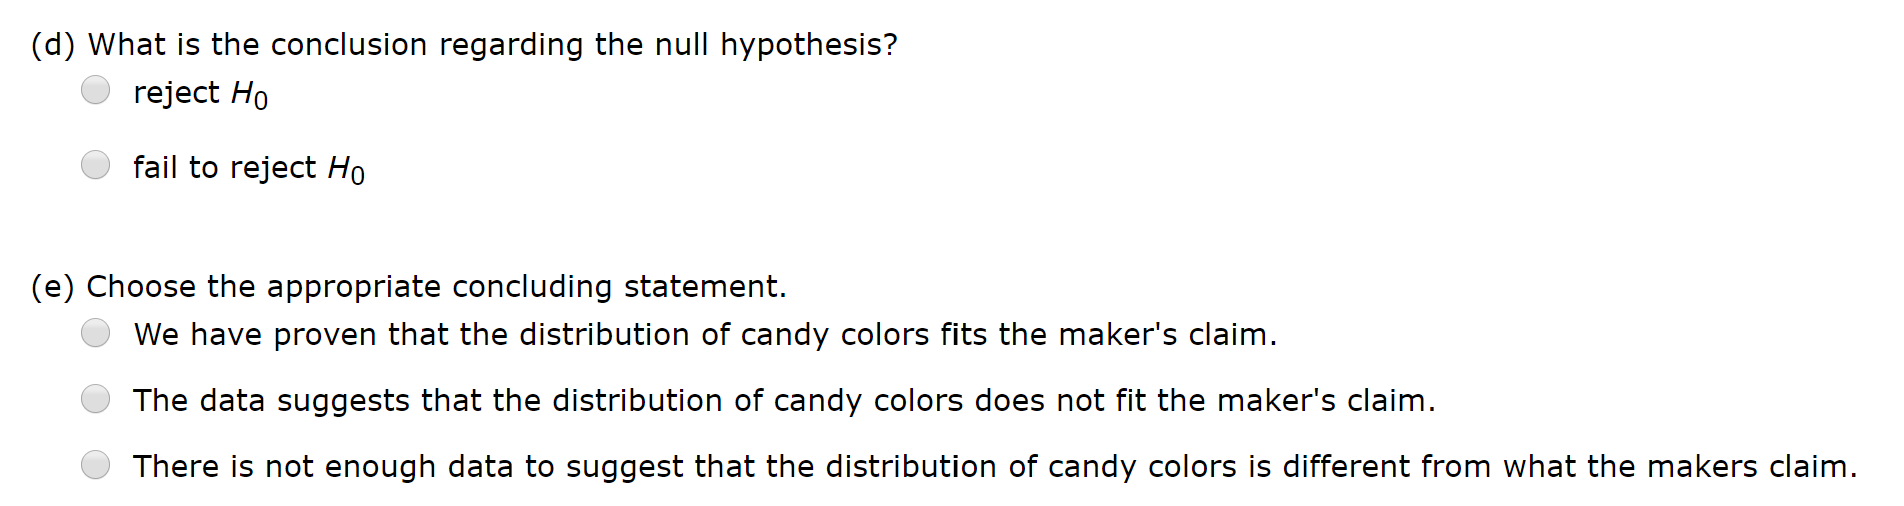 Solved M&M's Color Distribution: Suppose the makers of M&M